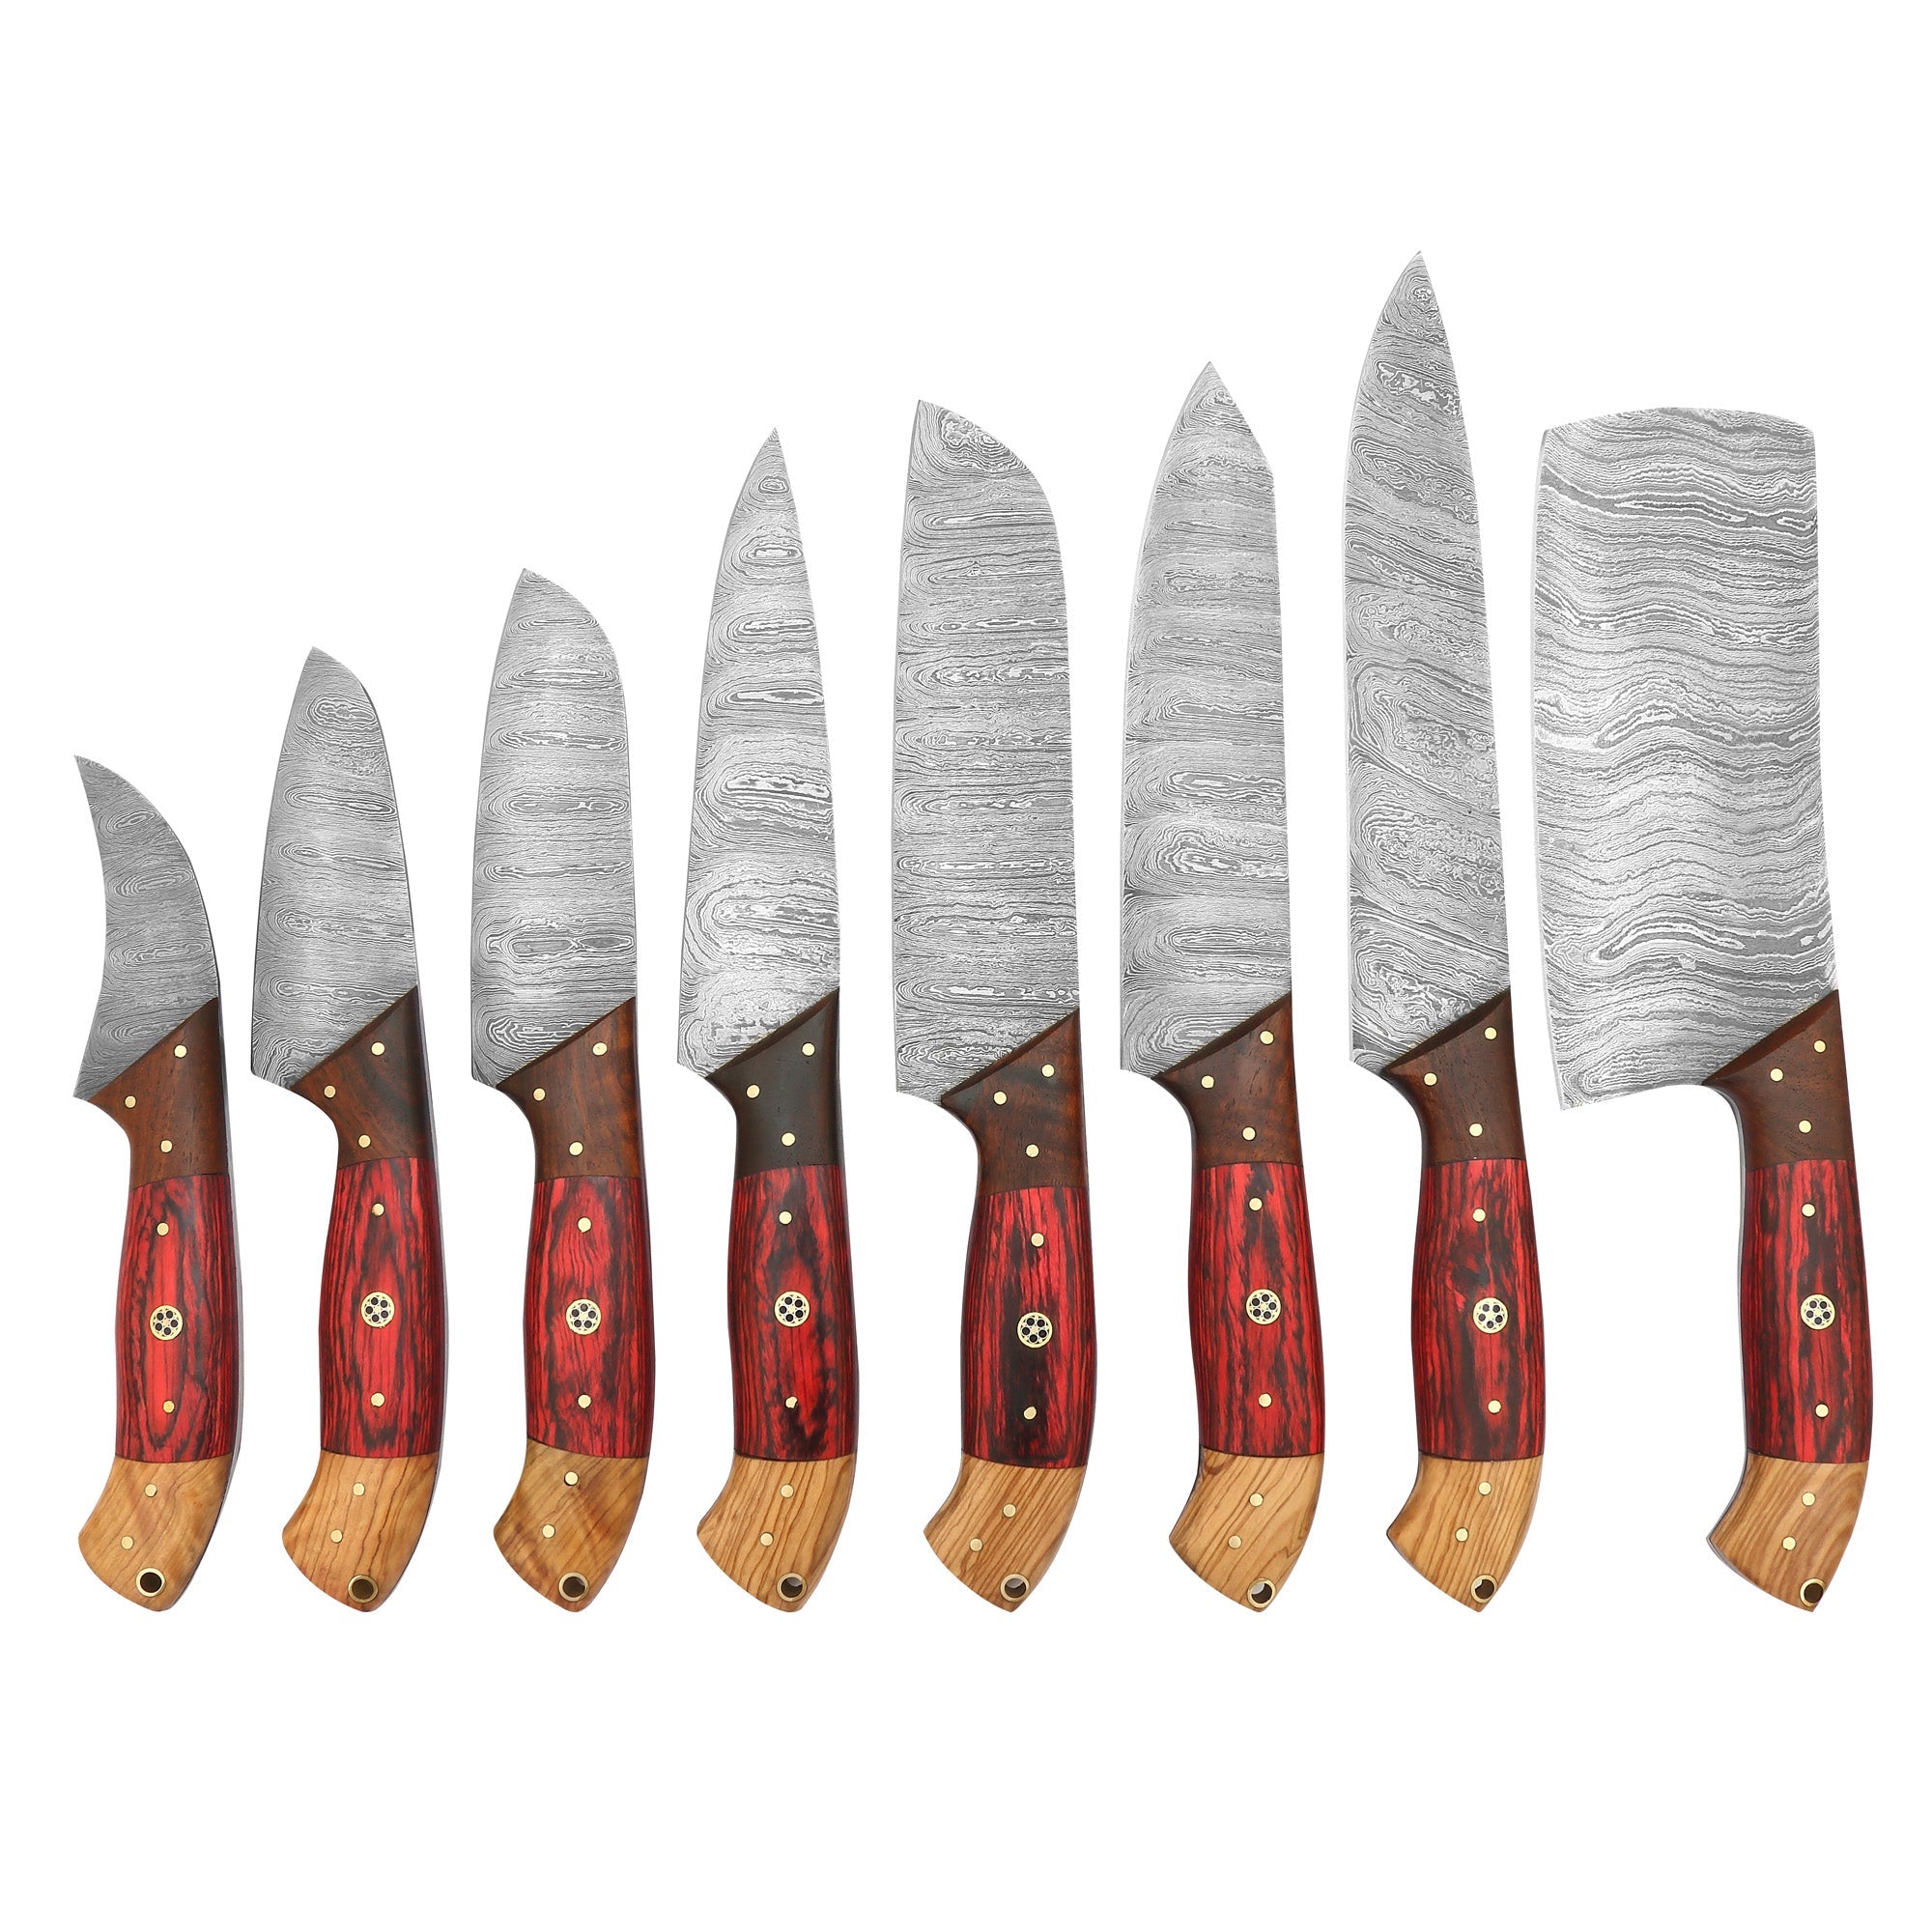 http://damascenknives.com/cdn/shop/files/damascen-knives-8-piece-set-for-kitchen-fixed-blade-with-leather-case-827.jpg?v=1682503954